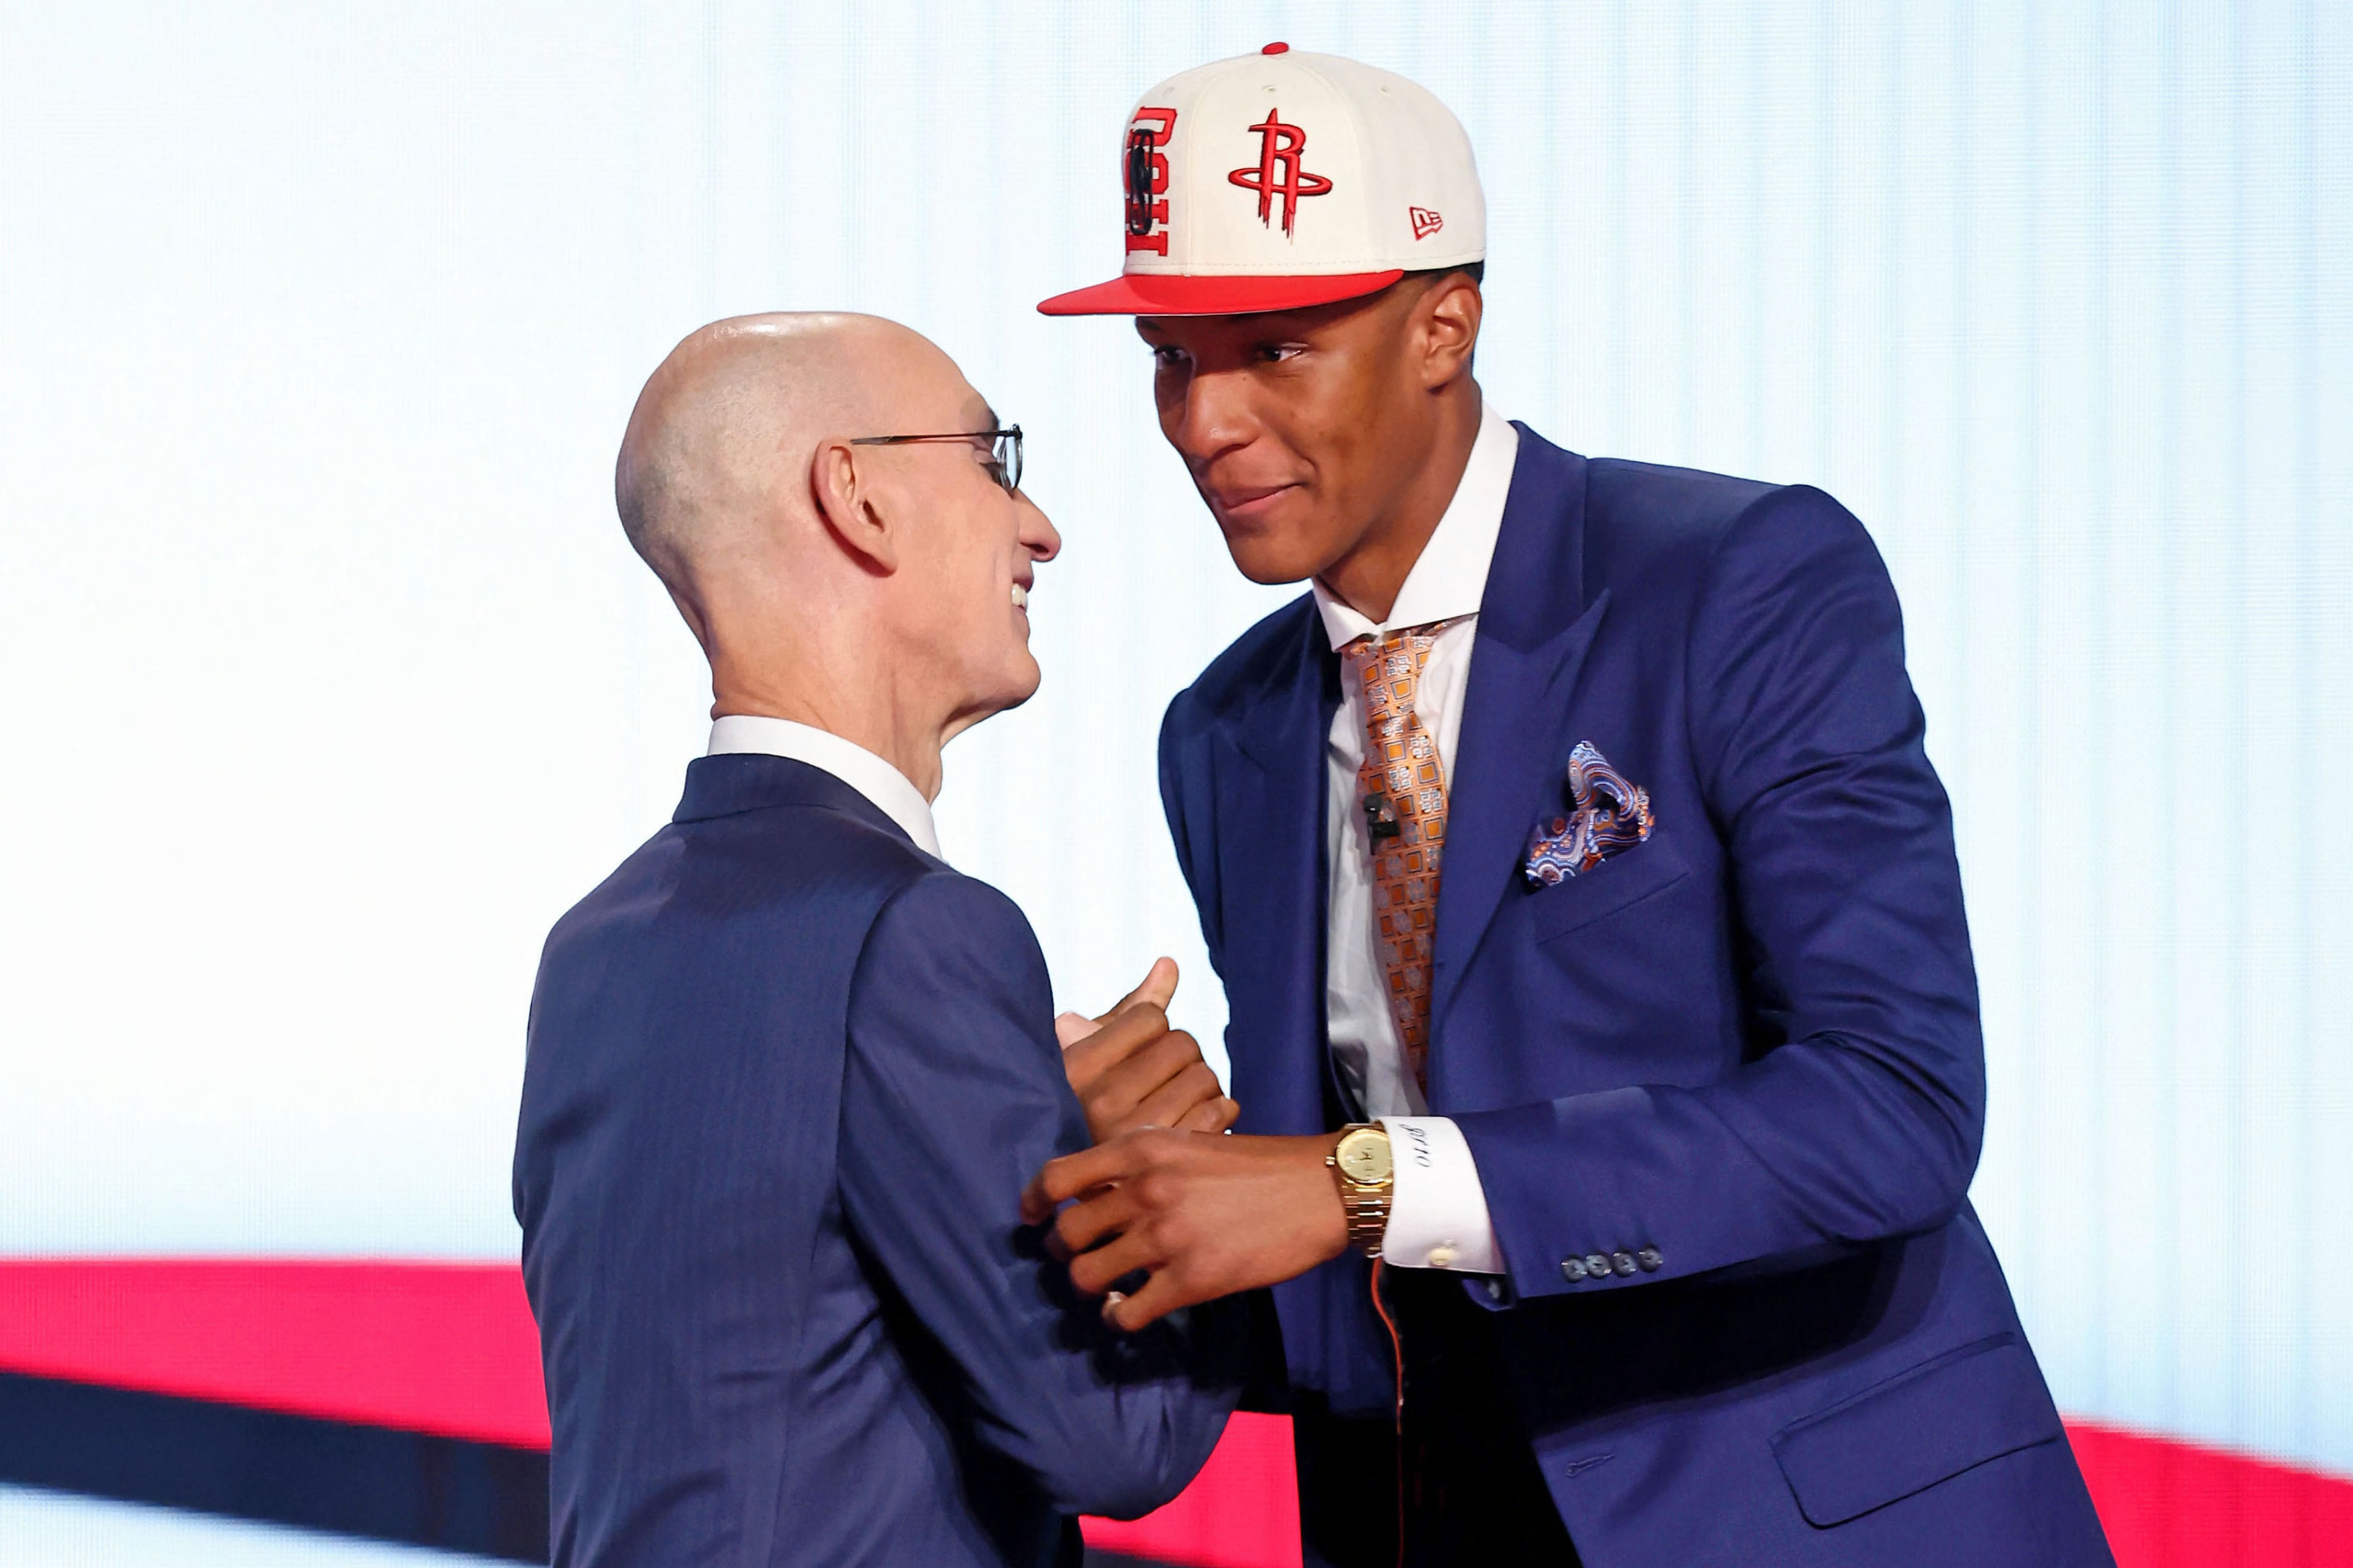 NBA Draft 2022: Draft grades for all 1st round pick selections